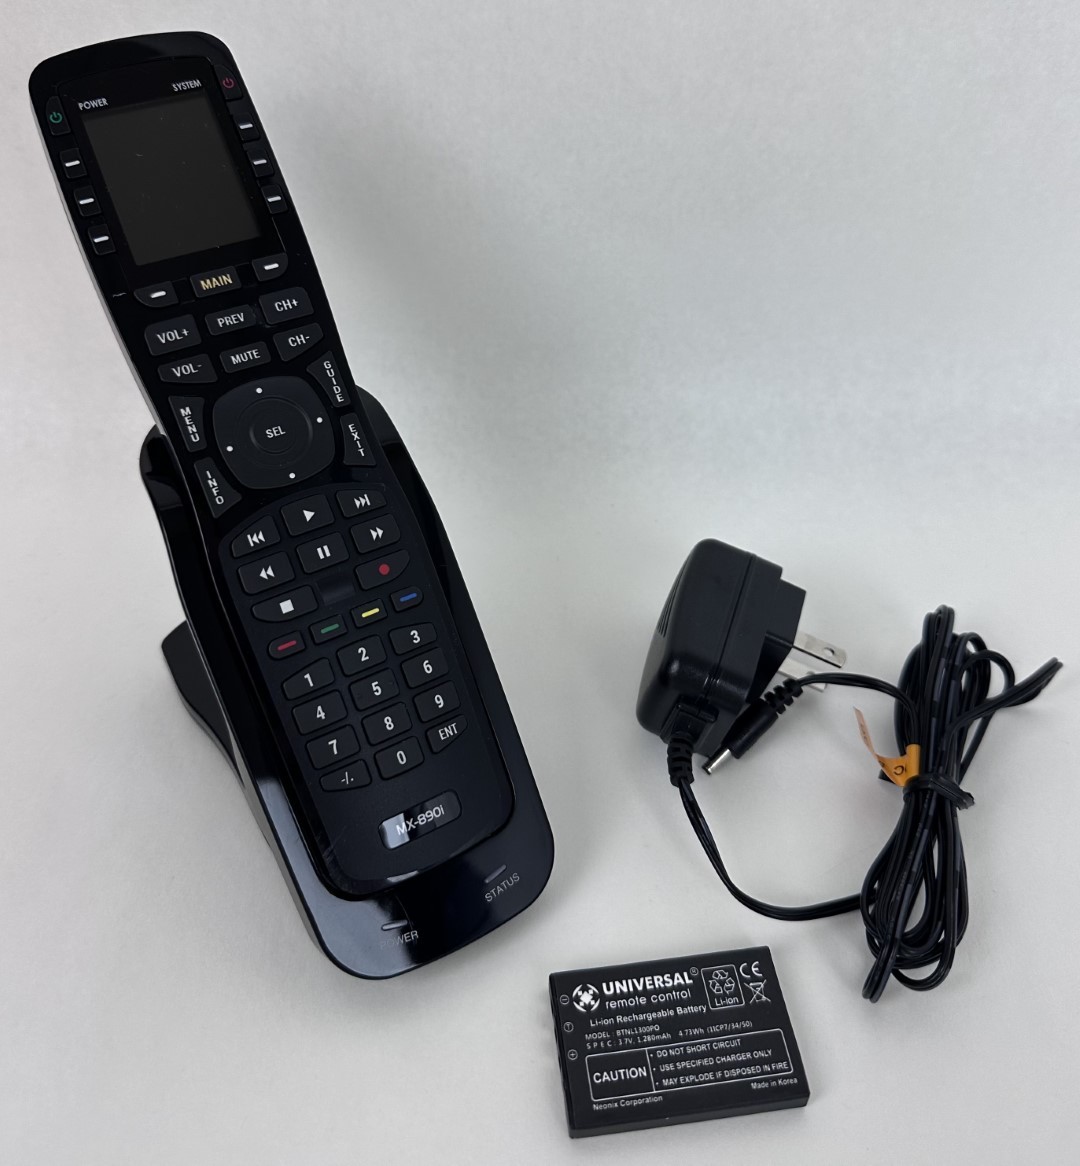 Universal Remote Control MX-890i IR/RF Open Architecture Remote w/Charging Base